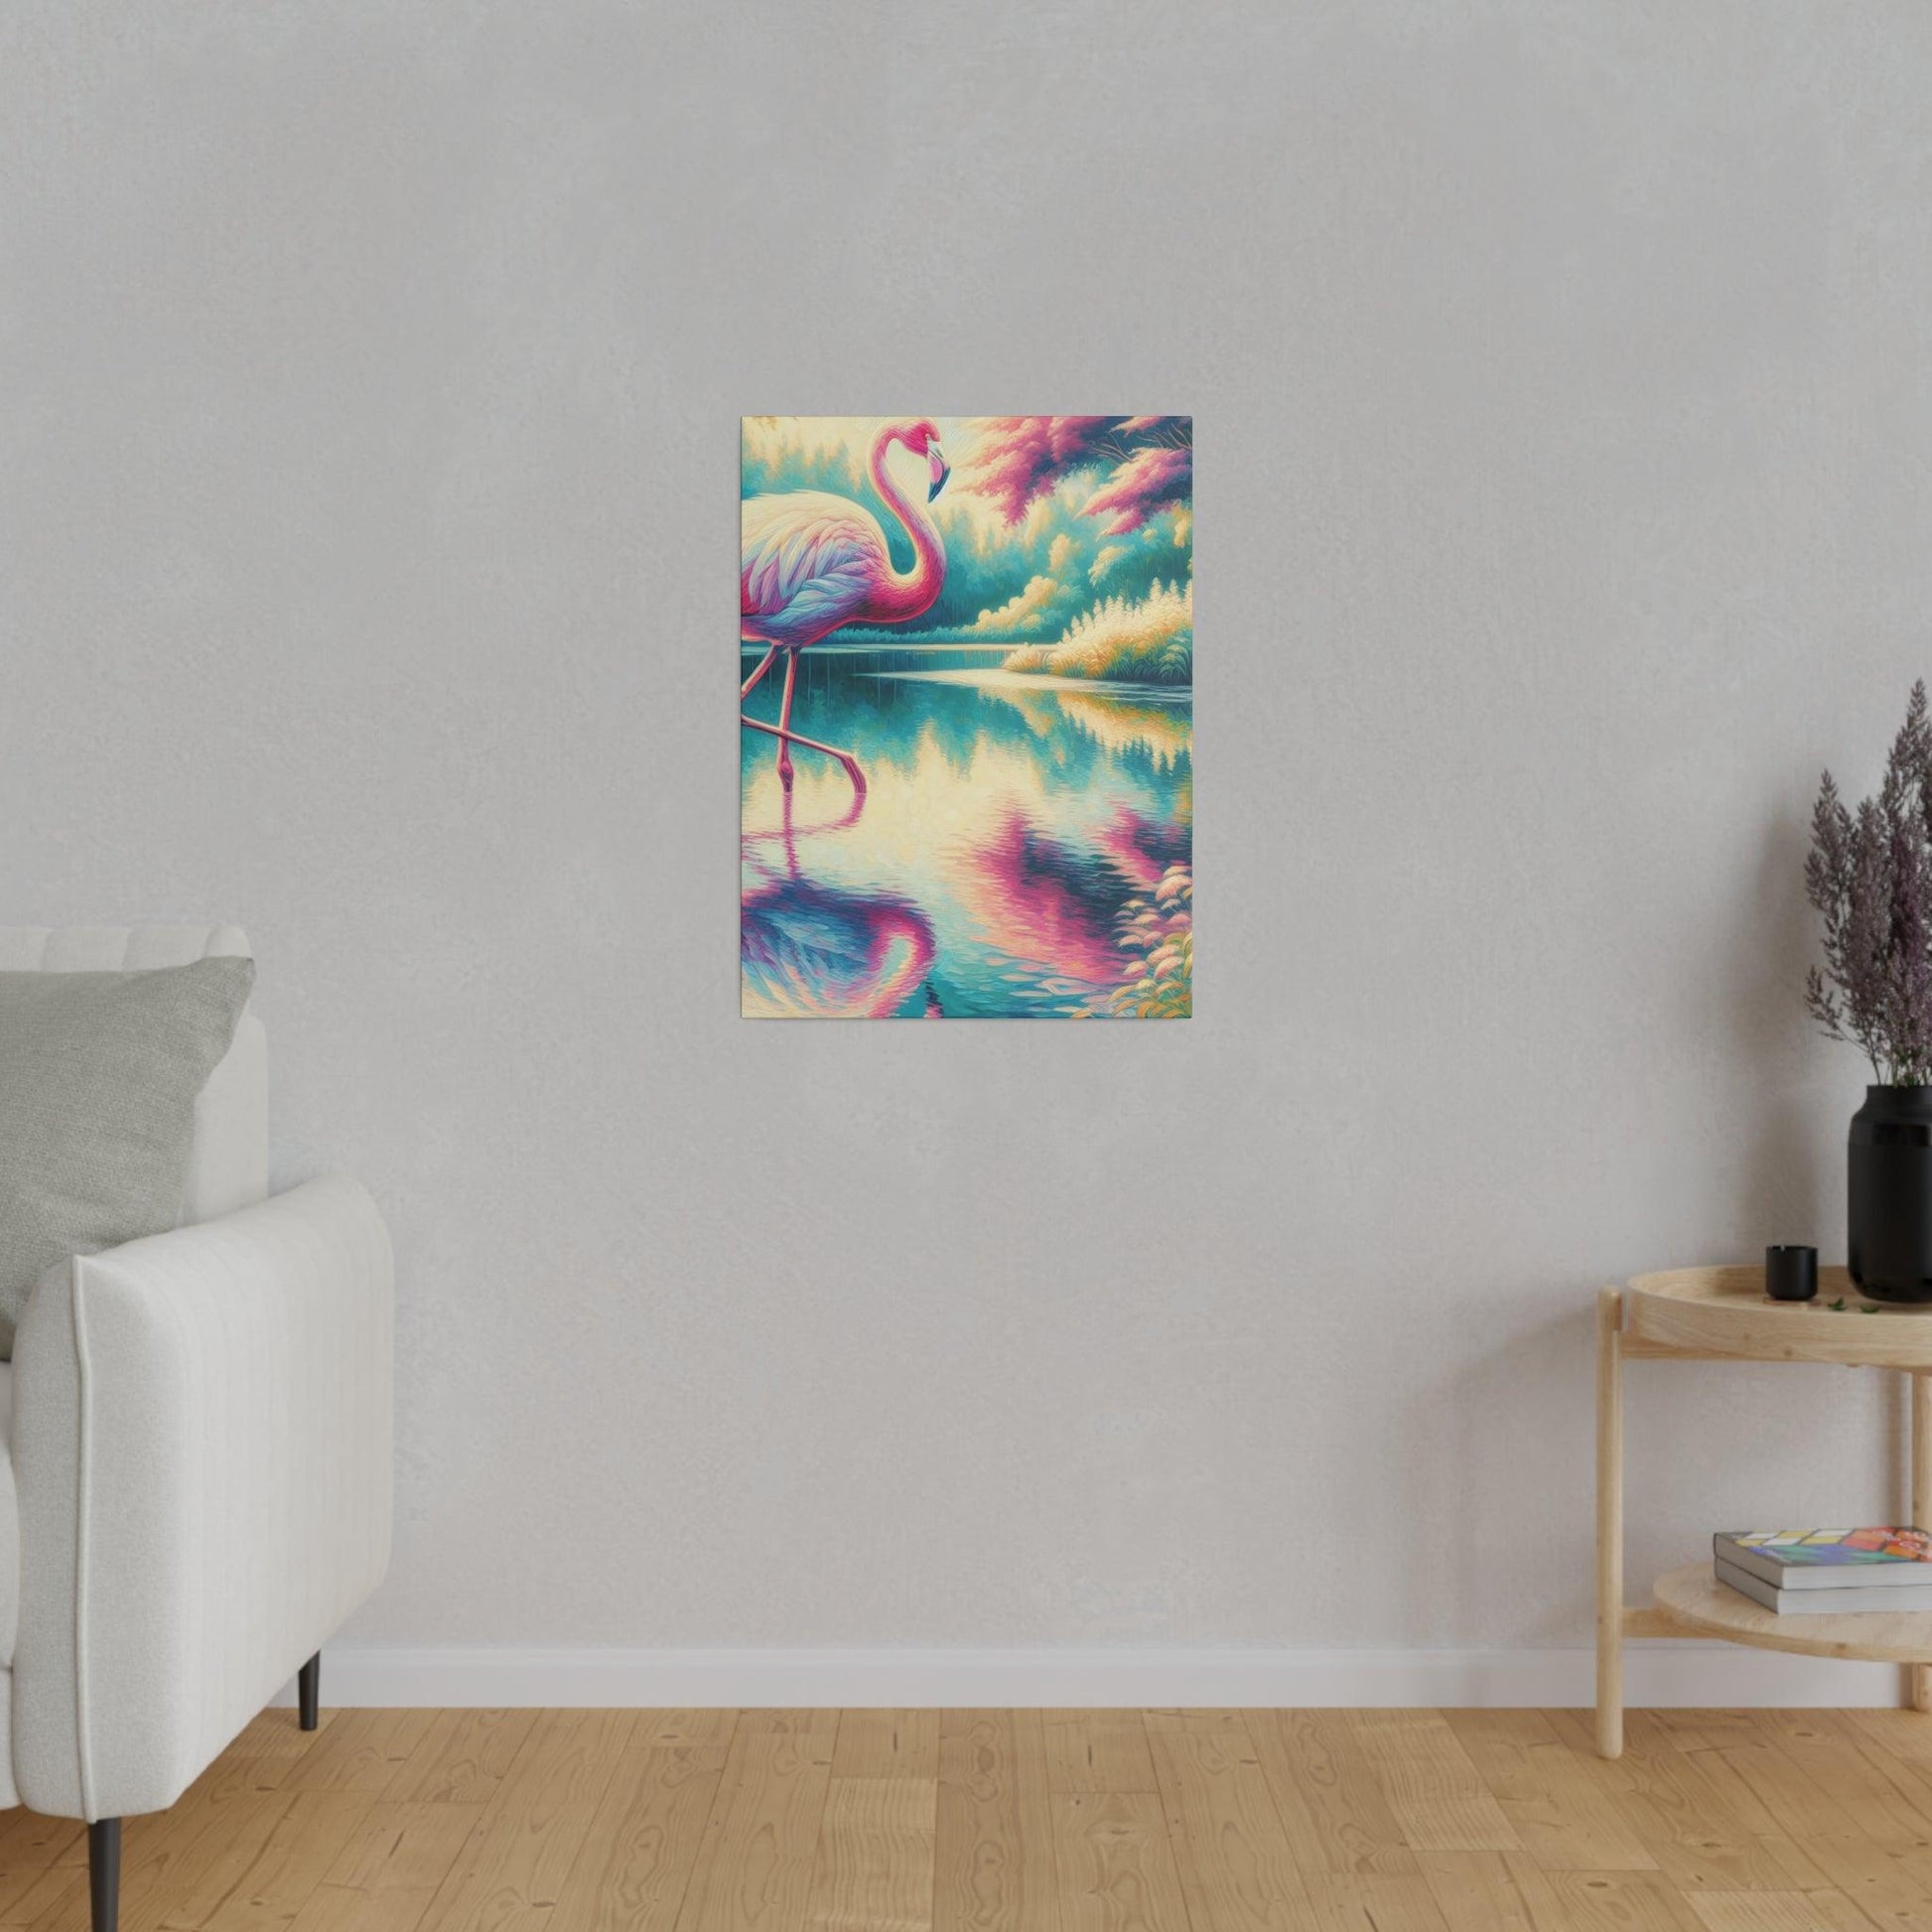 "Flamingo Elegance: Unraveled Canvas Wall Art" - The Alice Gallery